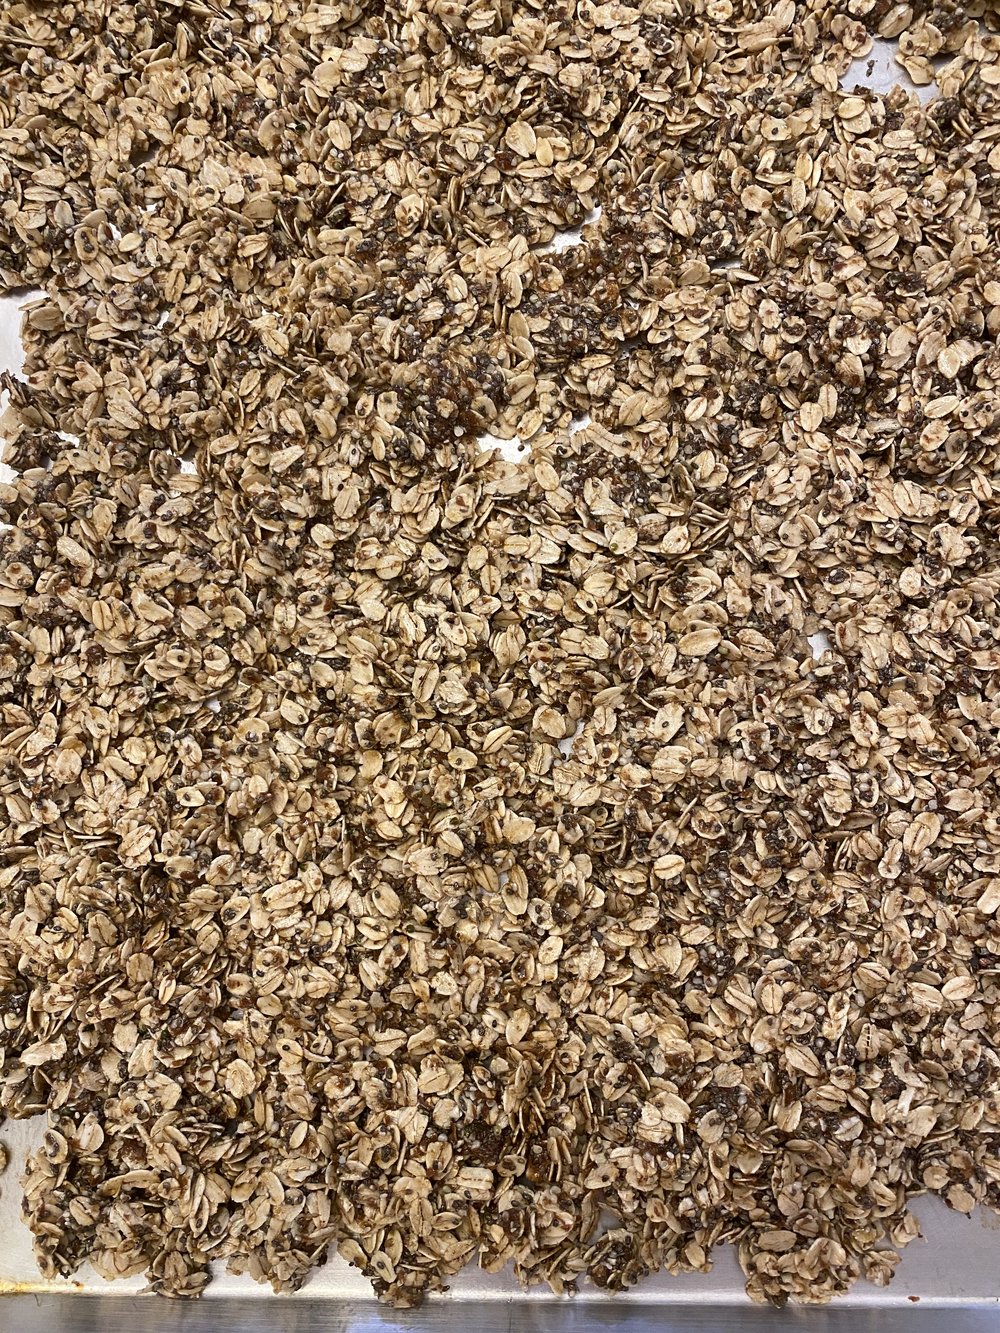 Oats before toasting